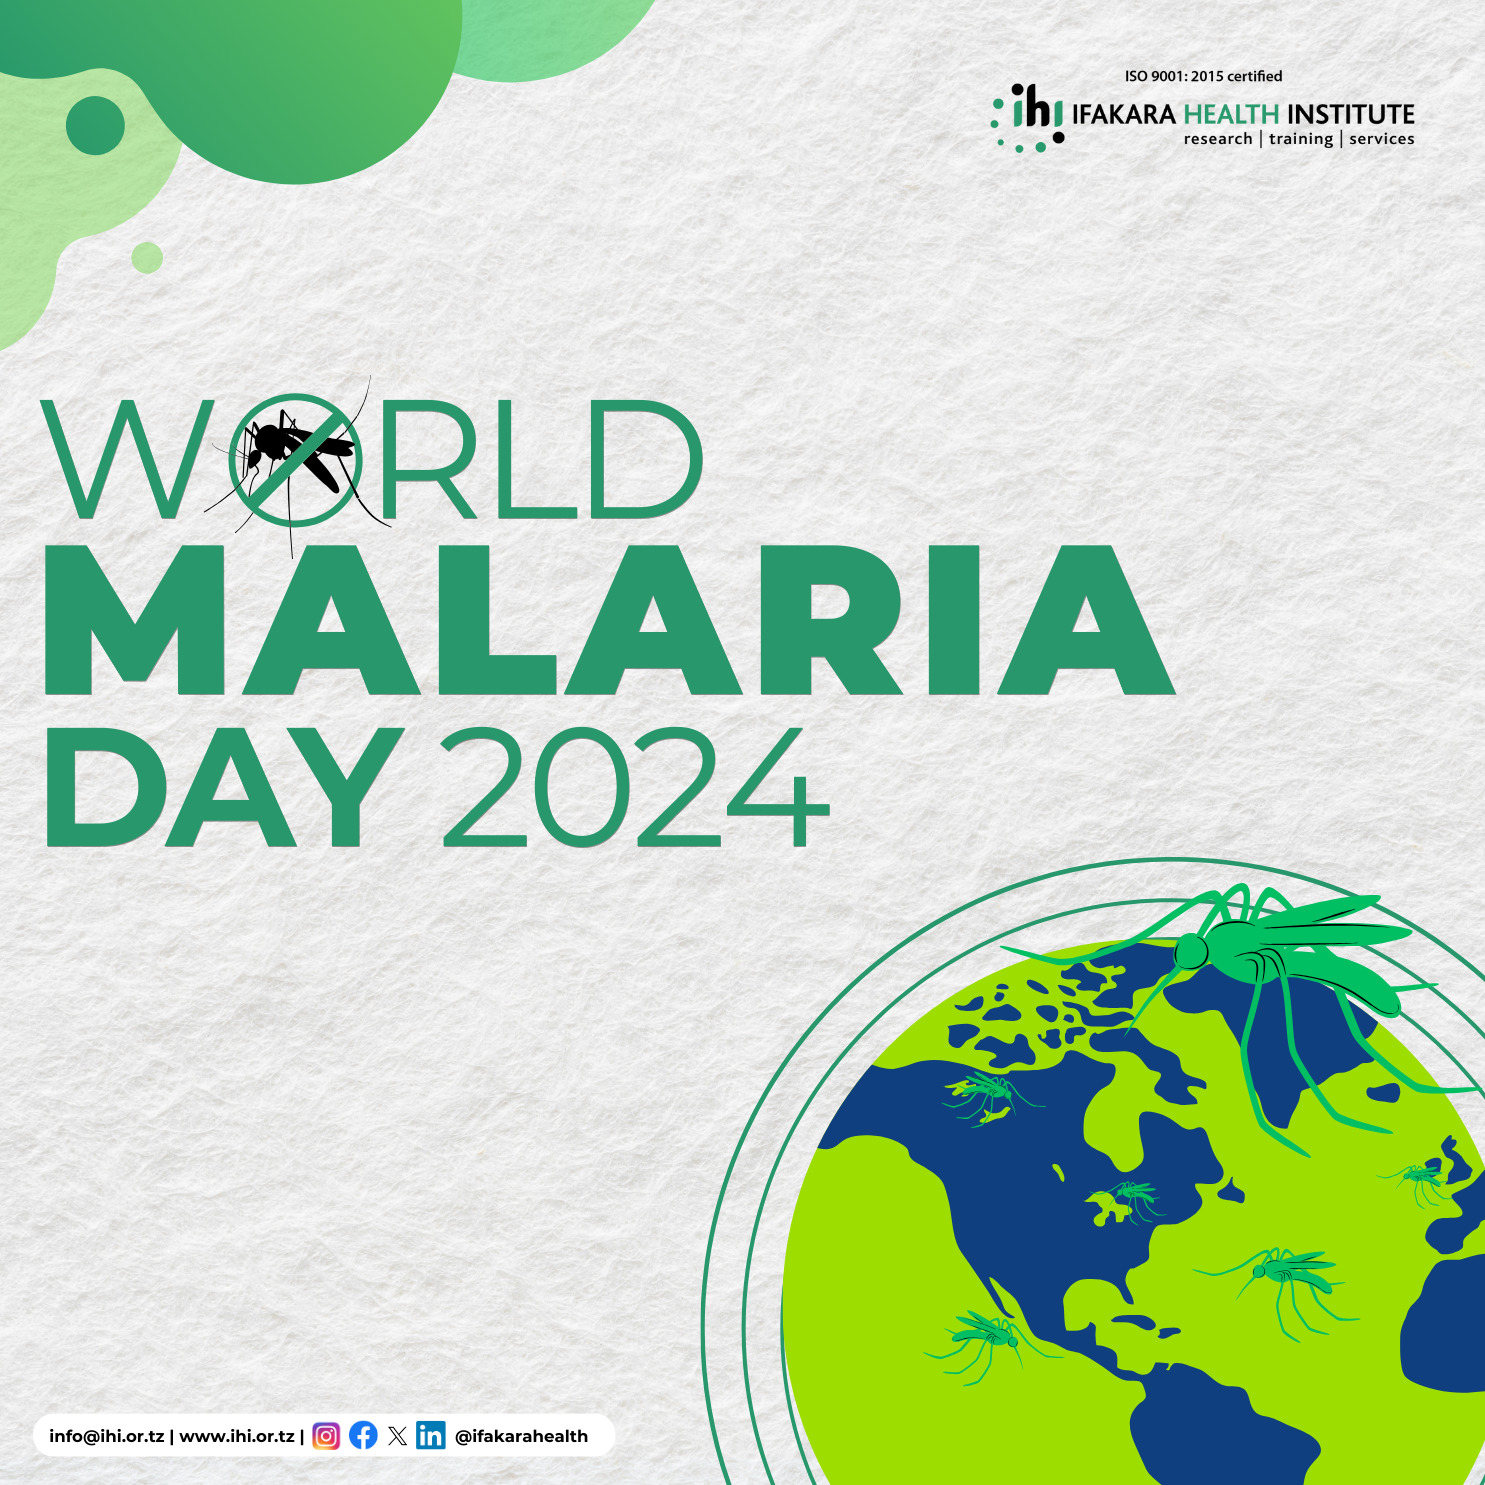 COMMEMORATION: Marking World Malaria Day 2024 with call for action to combat the disease!